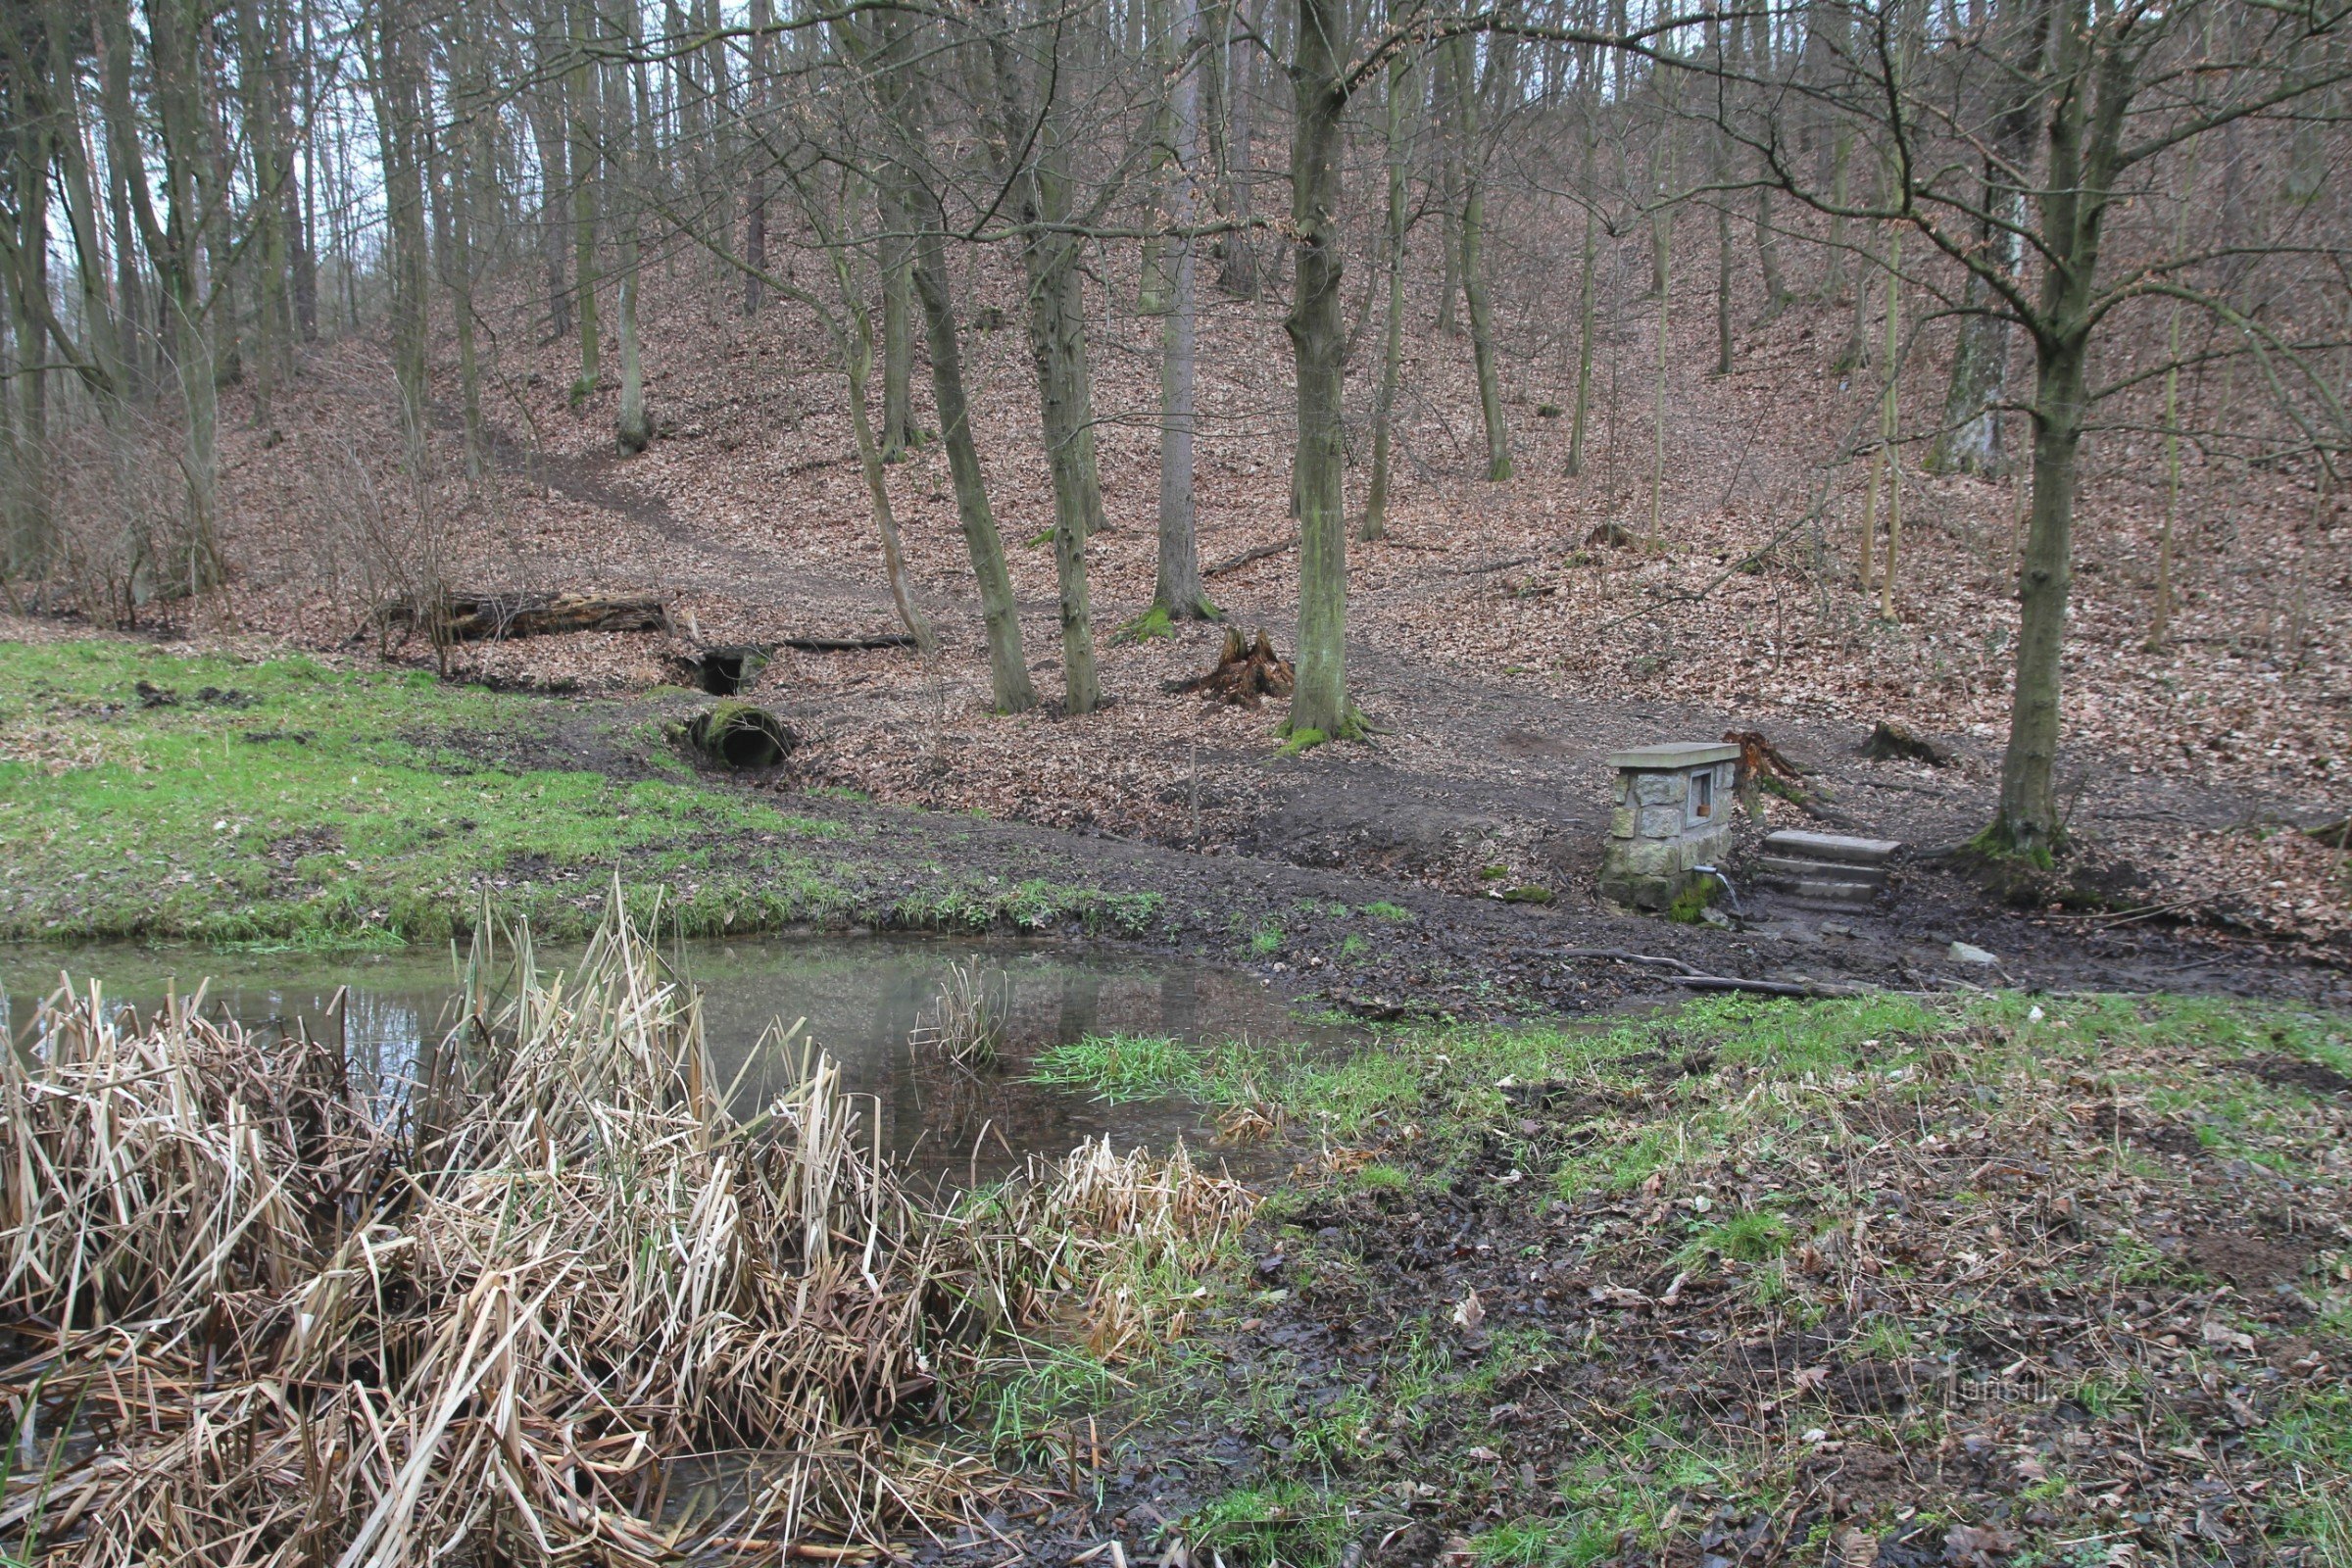 The original spring was located more to the left upstream